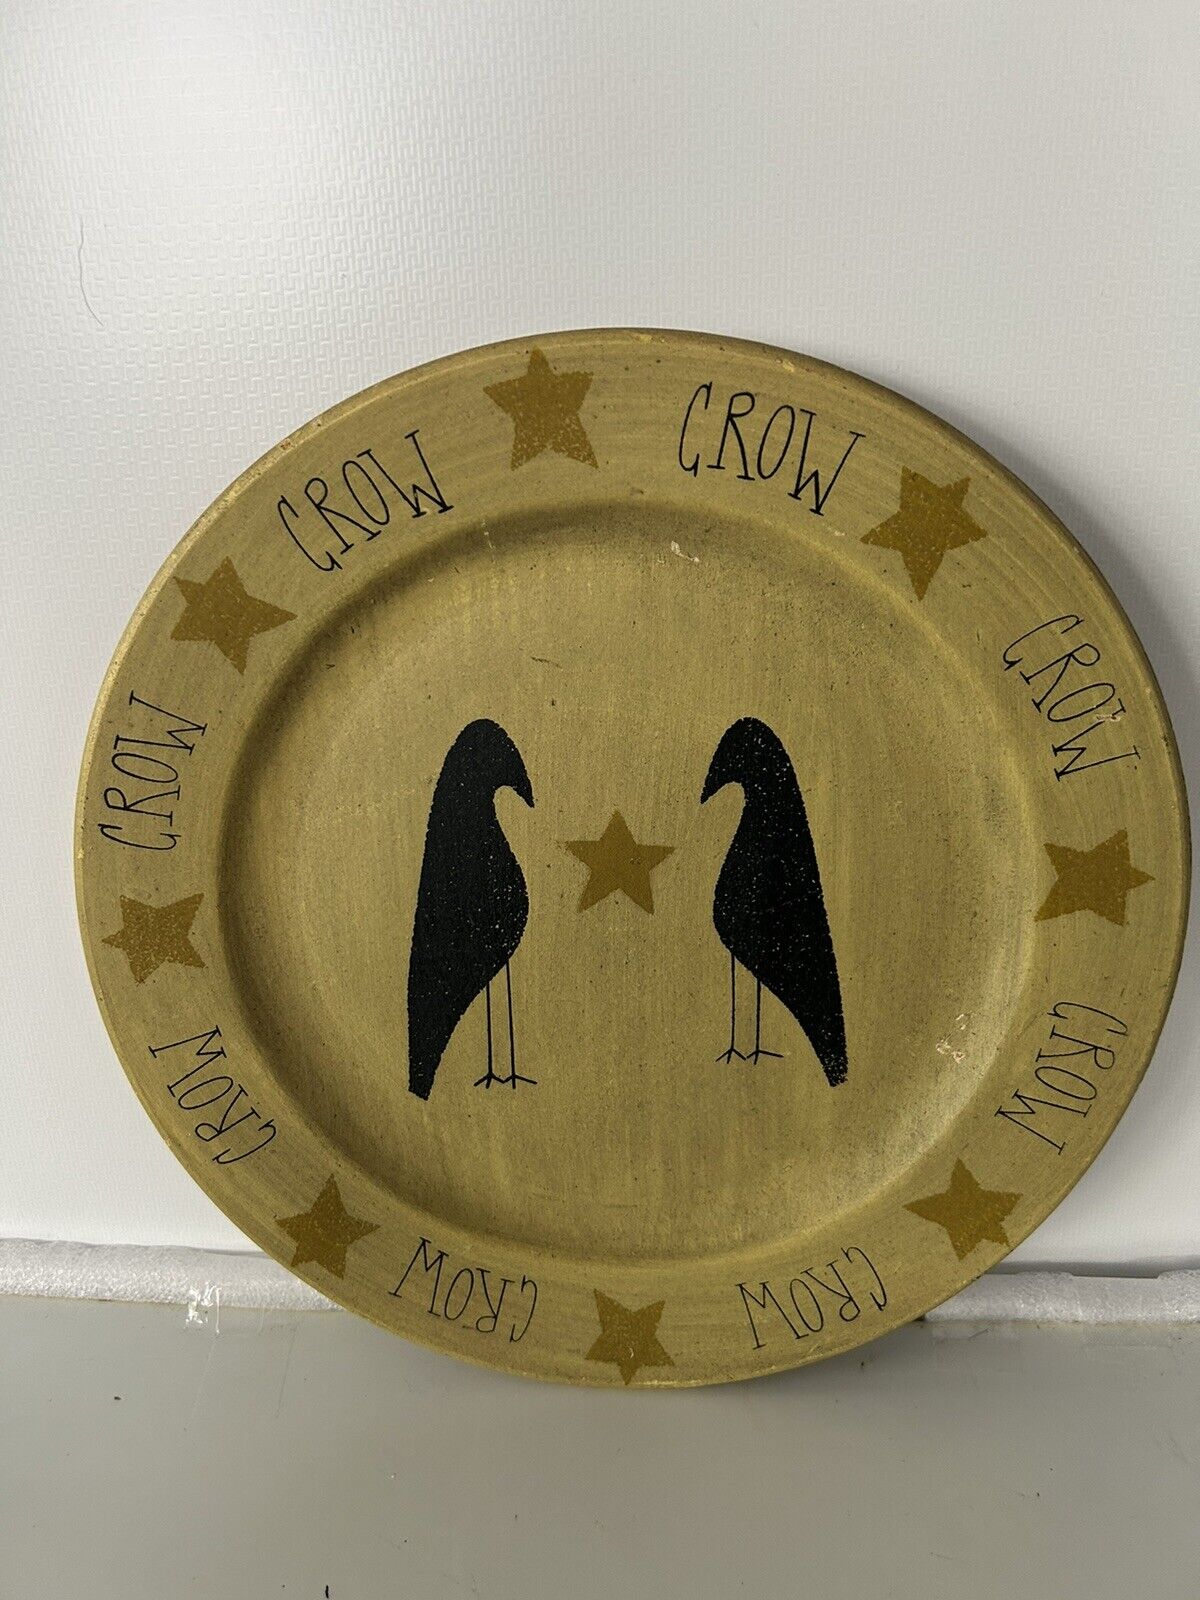 9” Plate Yellowish Color With Two Crows In The Middle